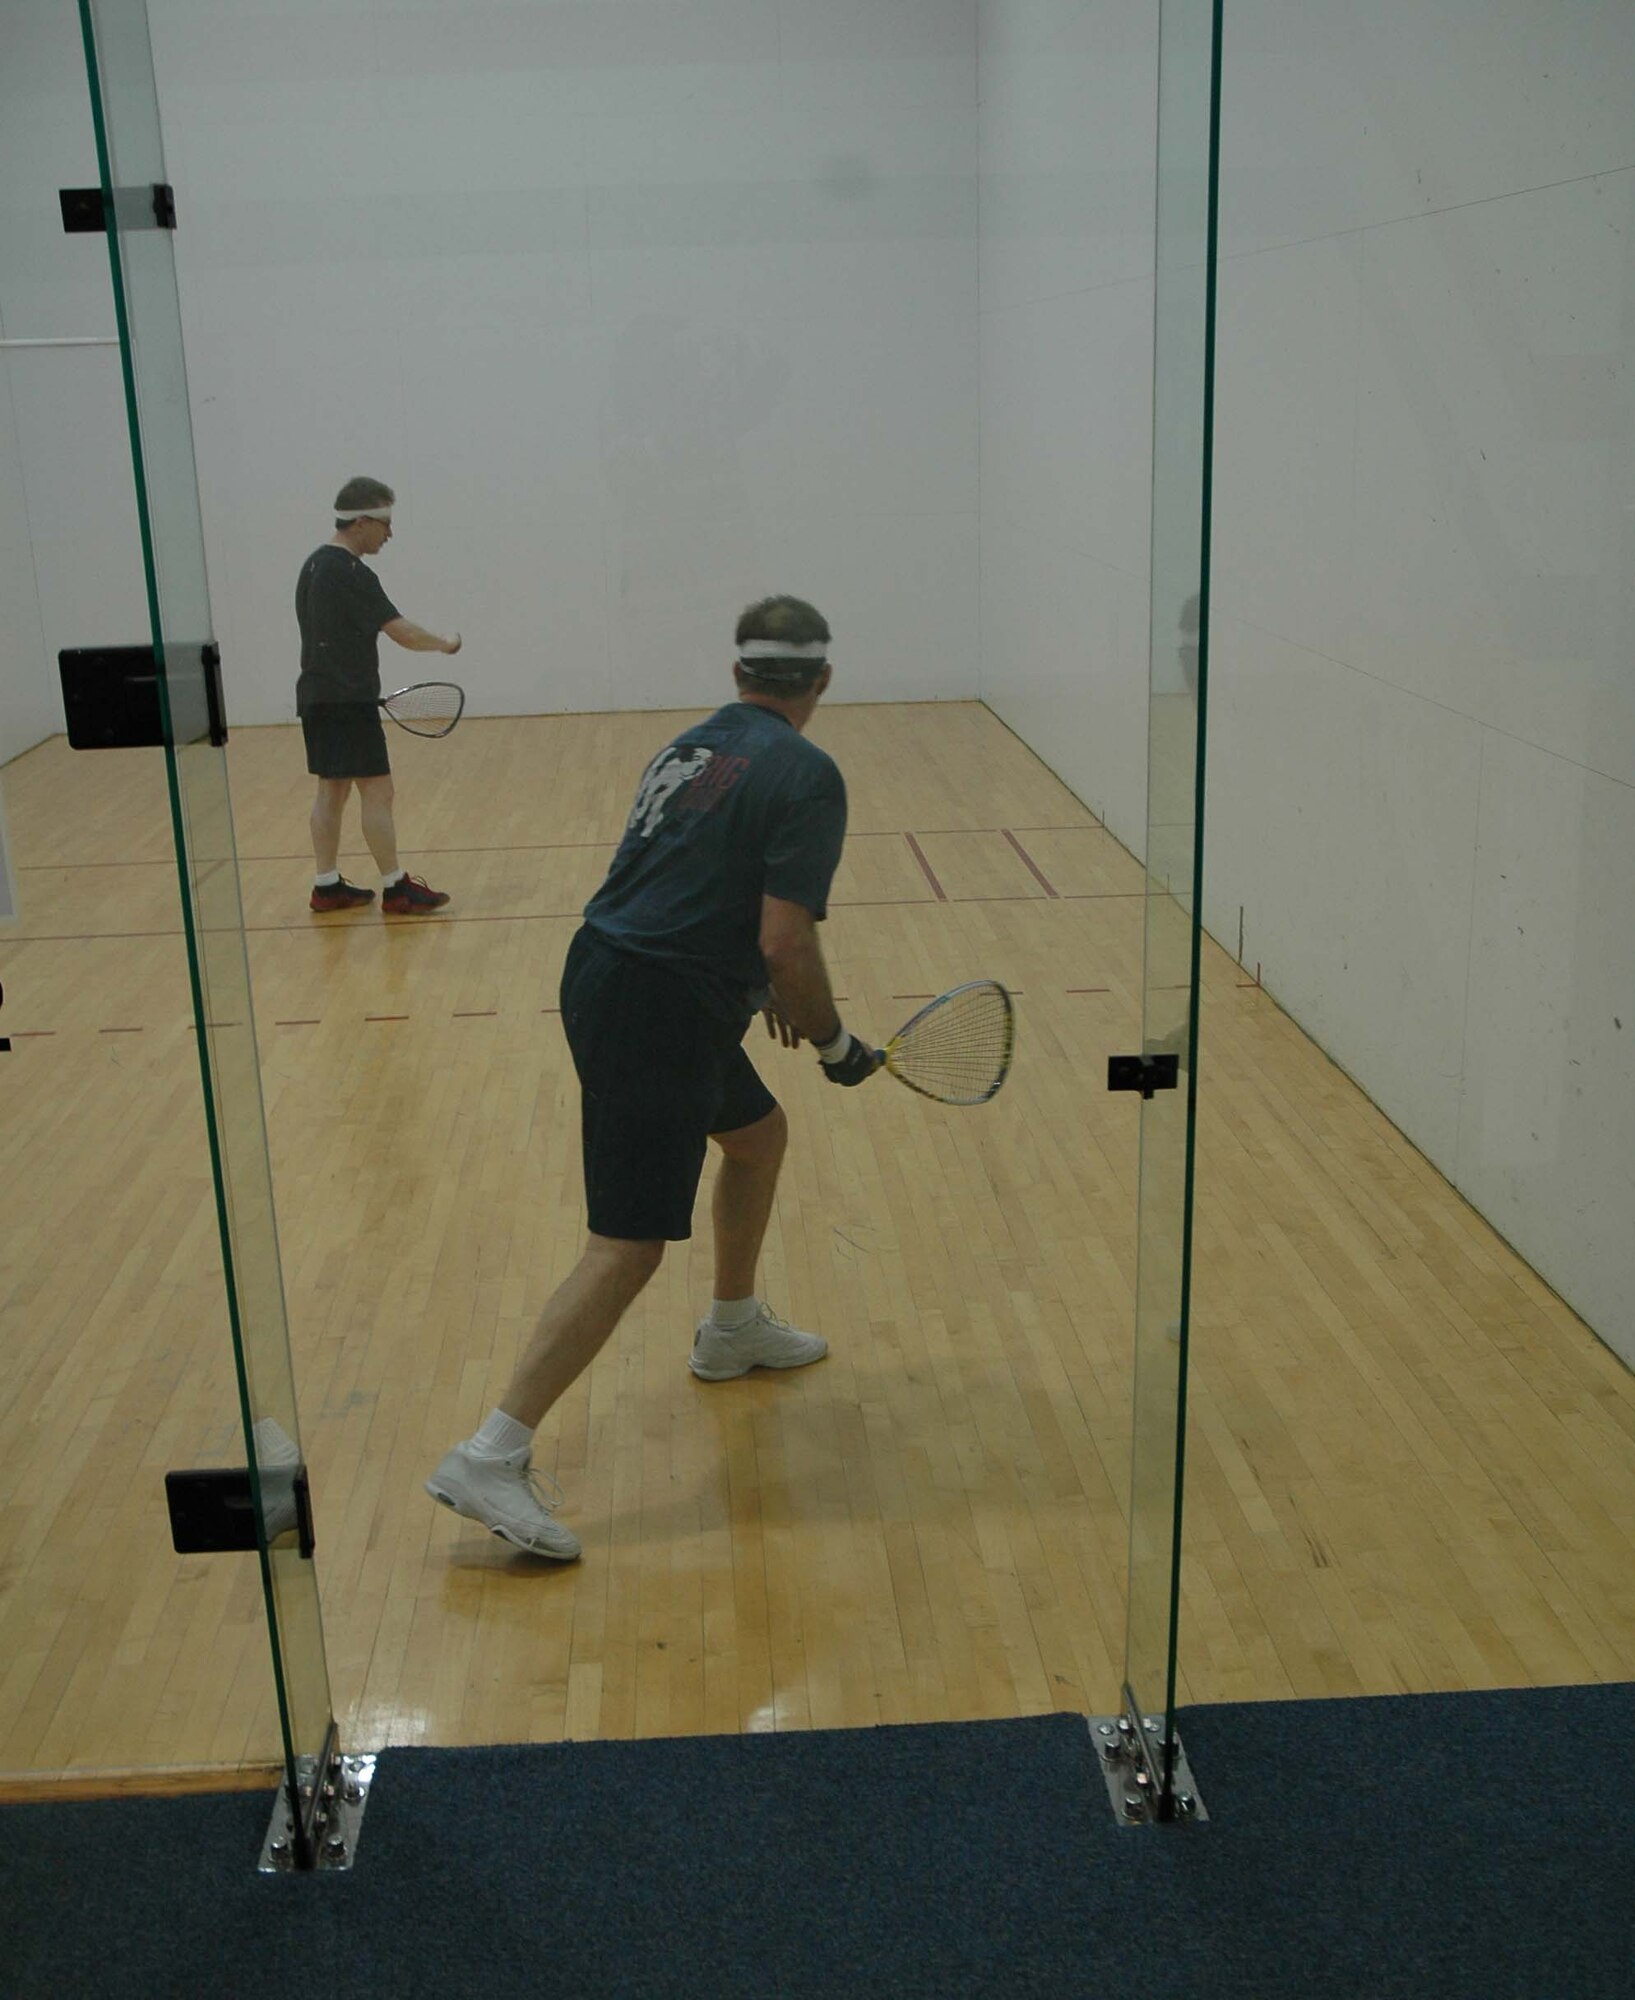 Jerry Kain (background) gets ready to return a serve from a fellow racquetball player during a lunchtime aerobic workout as part of his Largest Loser exercise routine. Mr. Kain plays the game three times a week and supplements on the other days with spinning classes. (U.S. Air Force photo/Valerie Mullett)